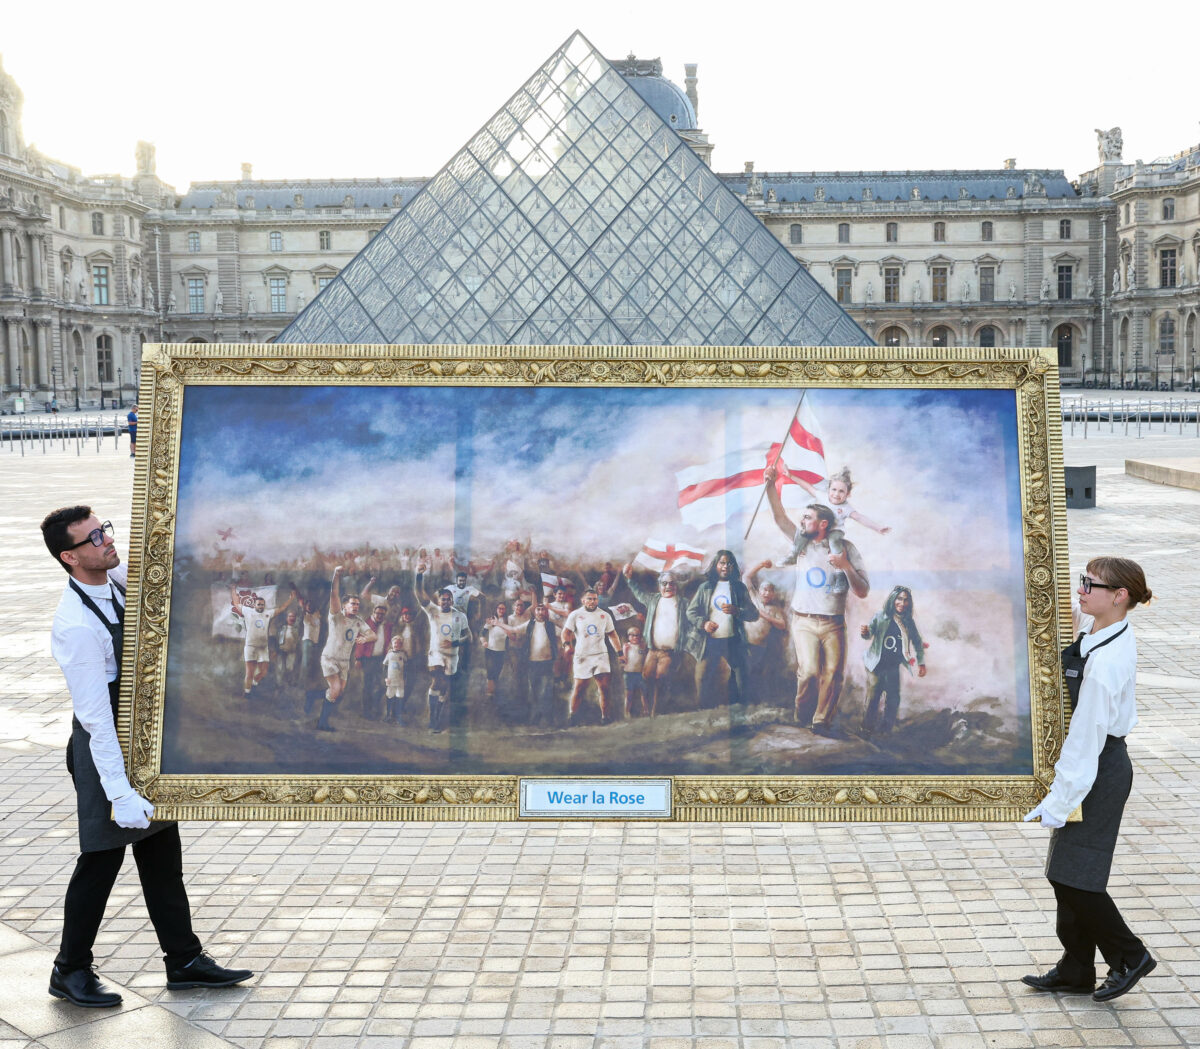 Telecom network O2, a long-standing sponsor of England Rugby, is celebrating England fans with a fan-focused campaign unveiled at Paris' Louvre Museum, depicted here.